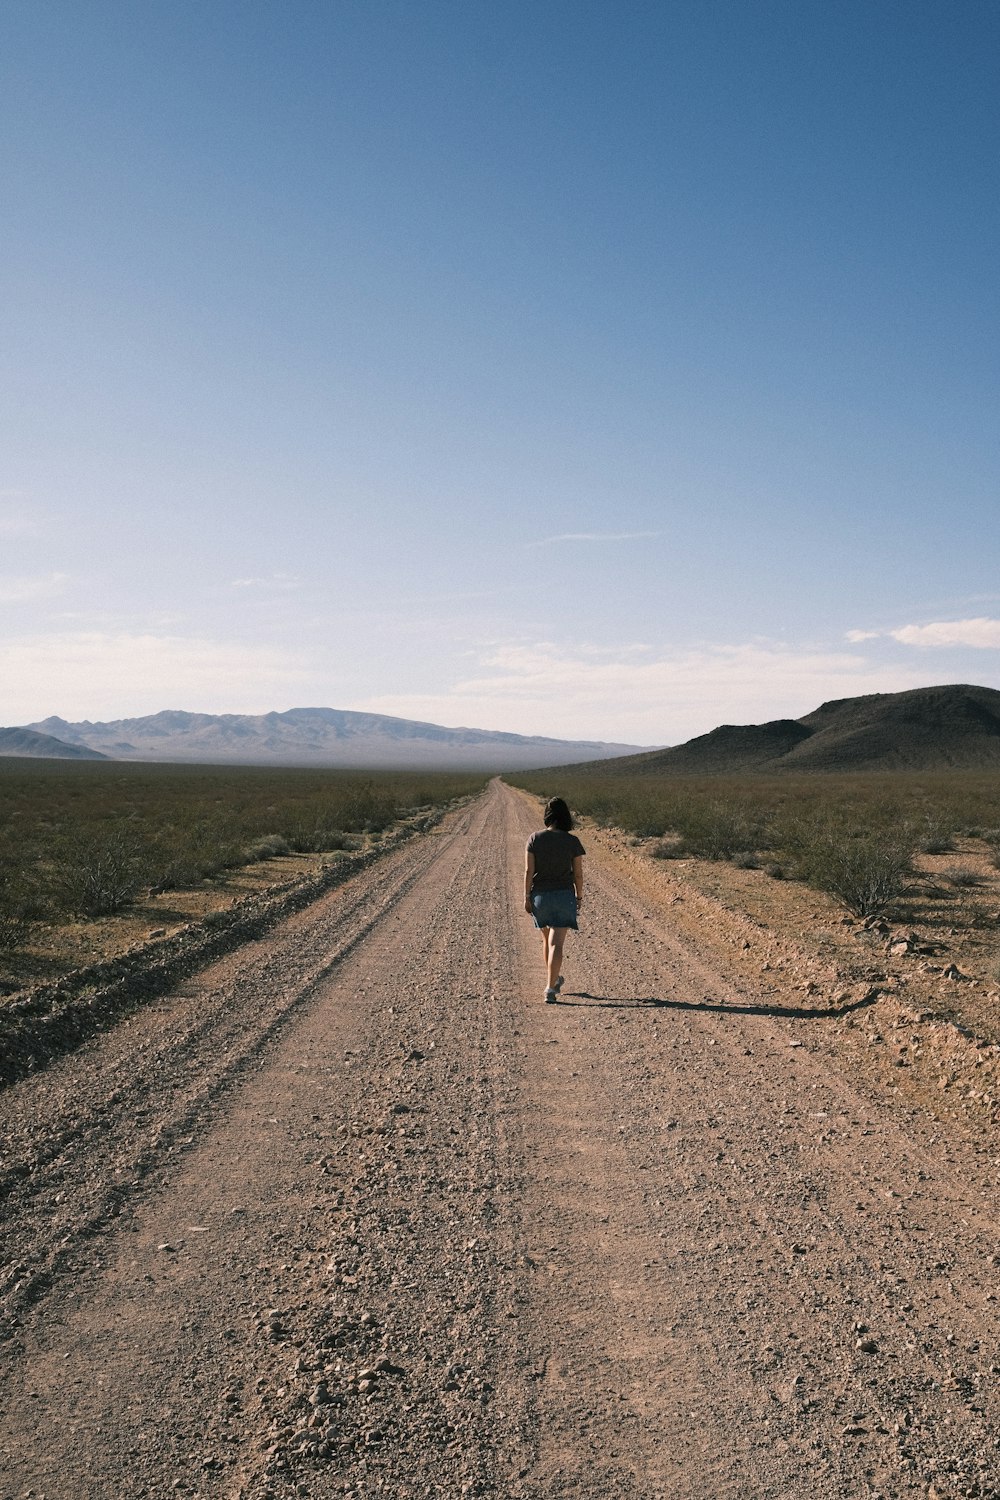 a person walking on a dirt road